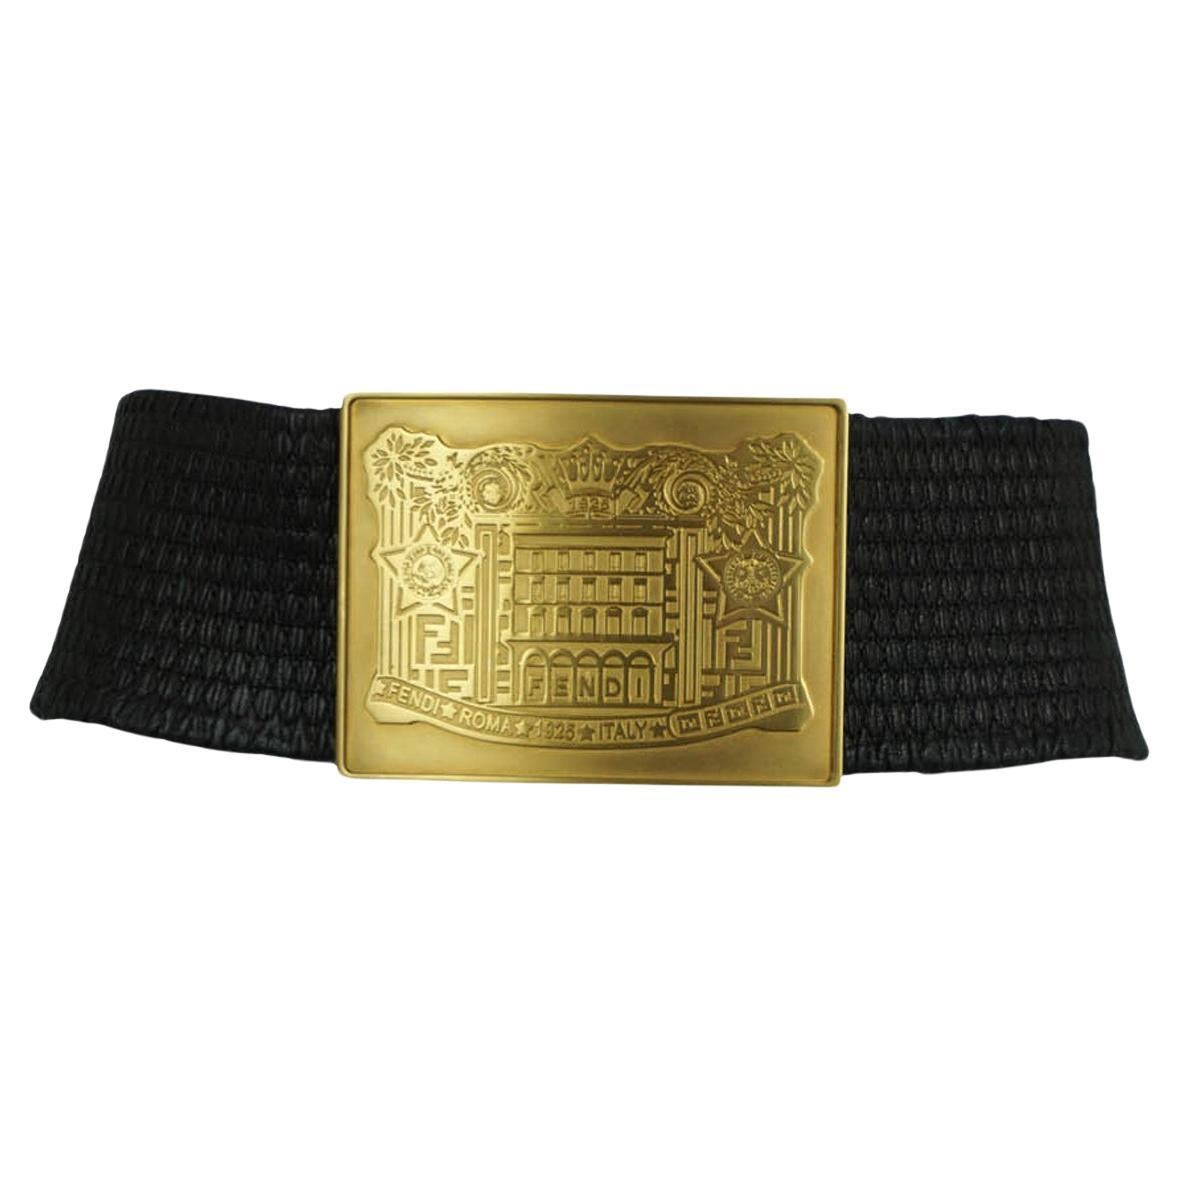 What is the largest size in Fendi men’s belts?